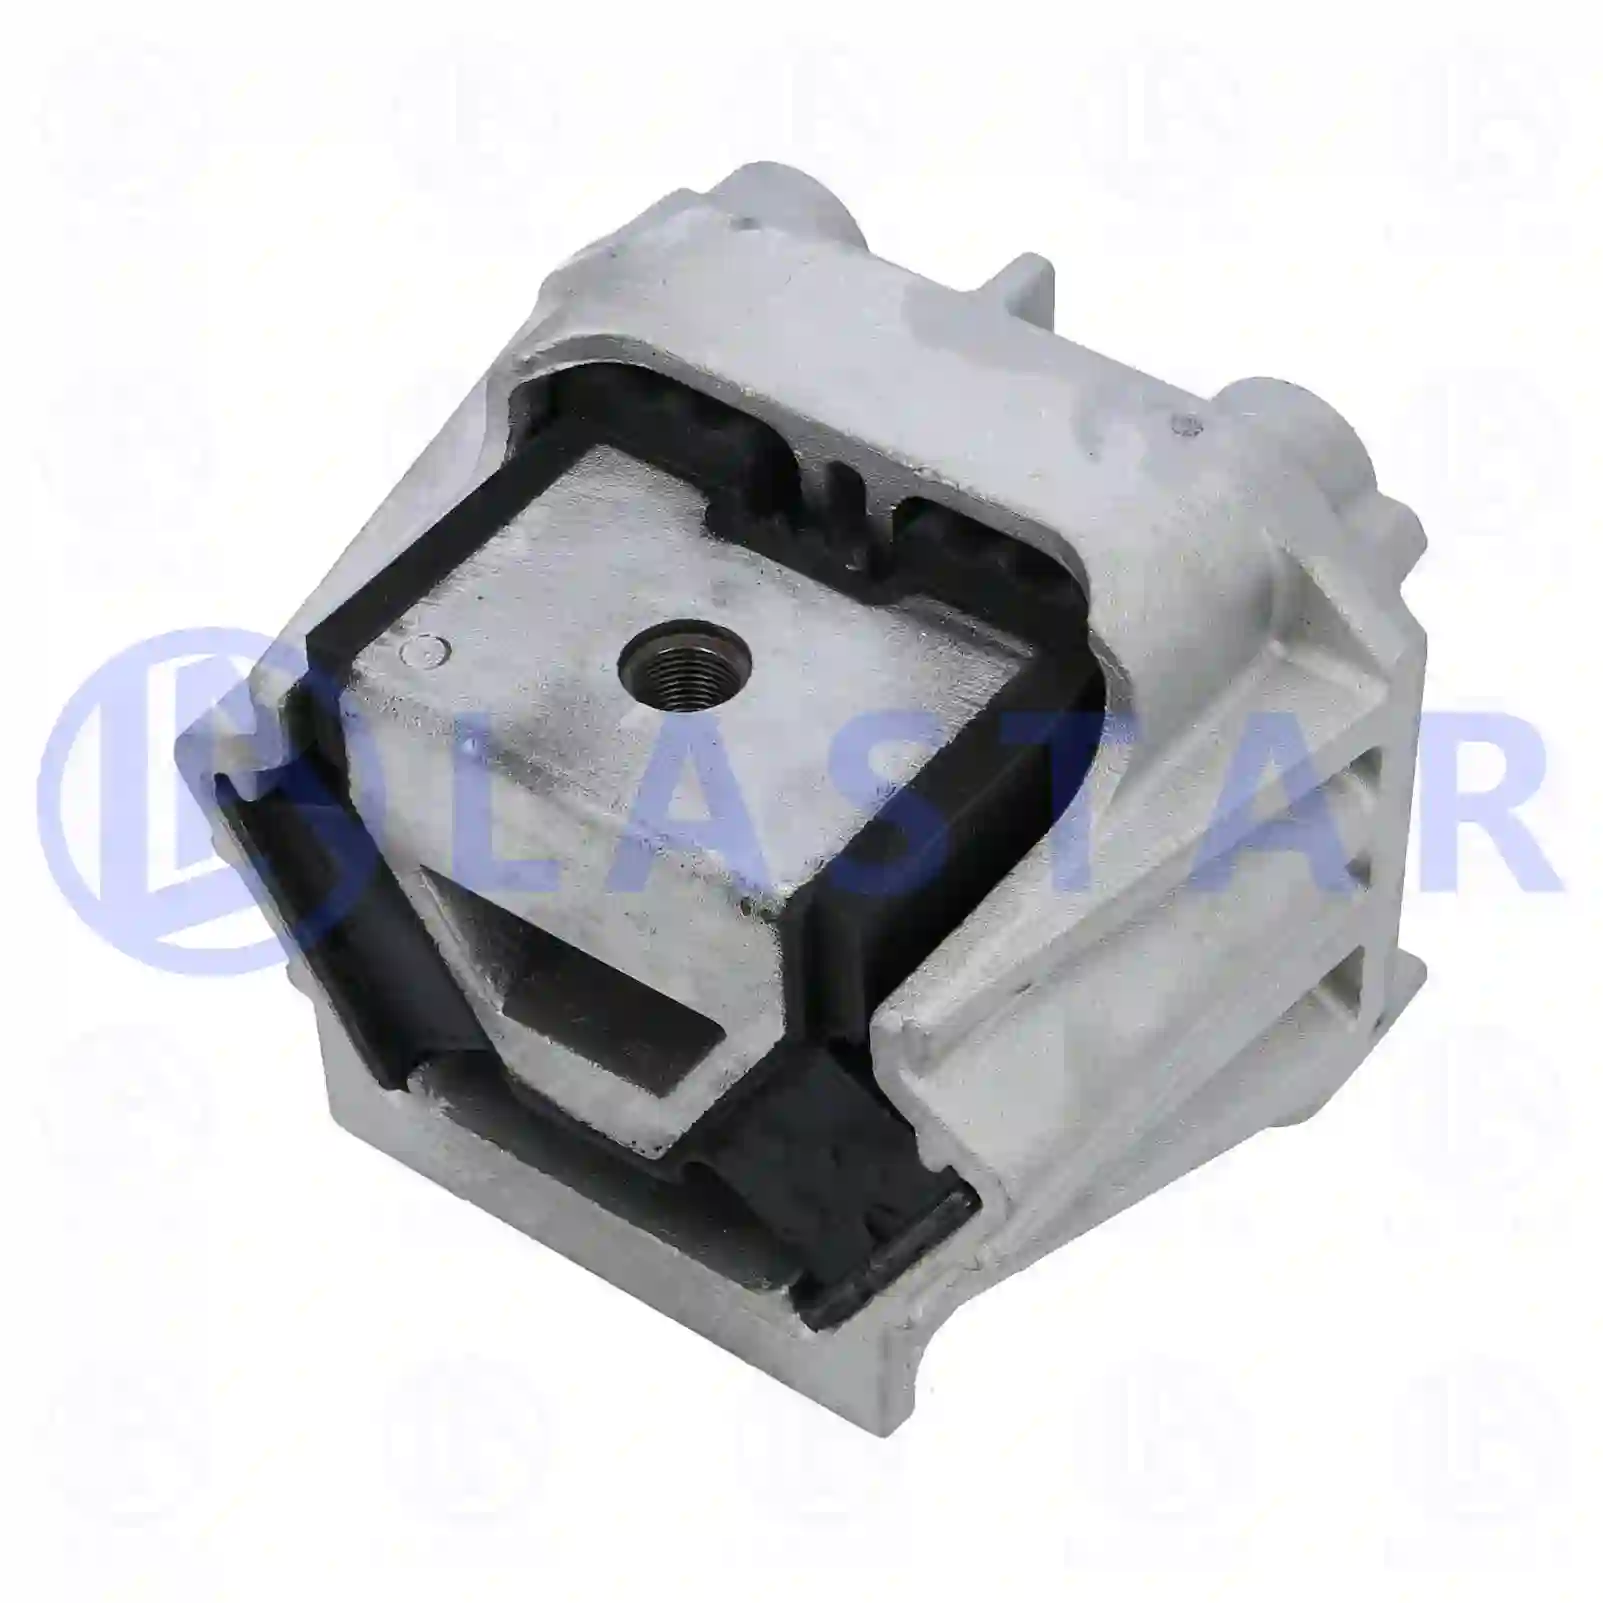 Engine mounting, 77702408, 9402401118, , , , ||  77702408 Lastar Spare Part | Truck Spare Parts, Auotomotive Spare Parts Engine mounting, 77702408, 9402401118, , , , ||  77702408 Lastar Spare Part | Truck Spare Parts, Auotomotive Spare Parts